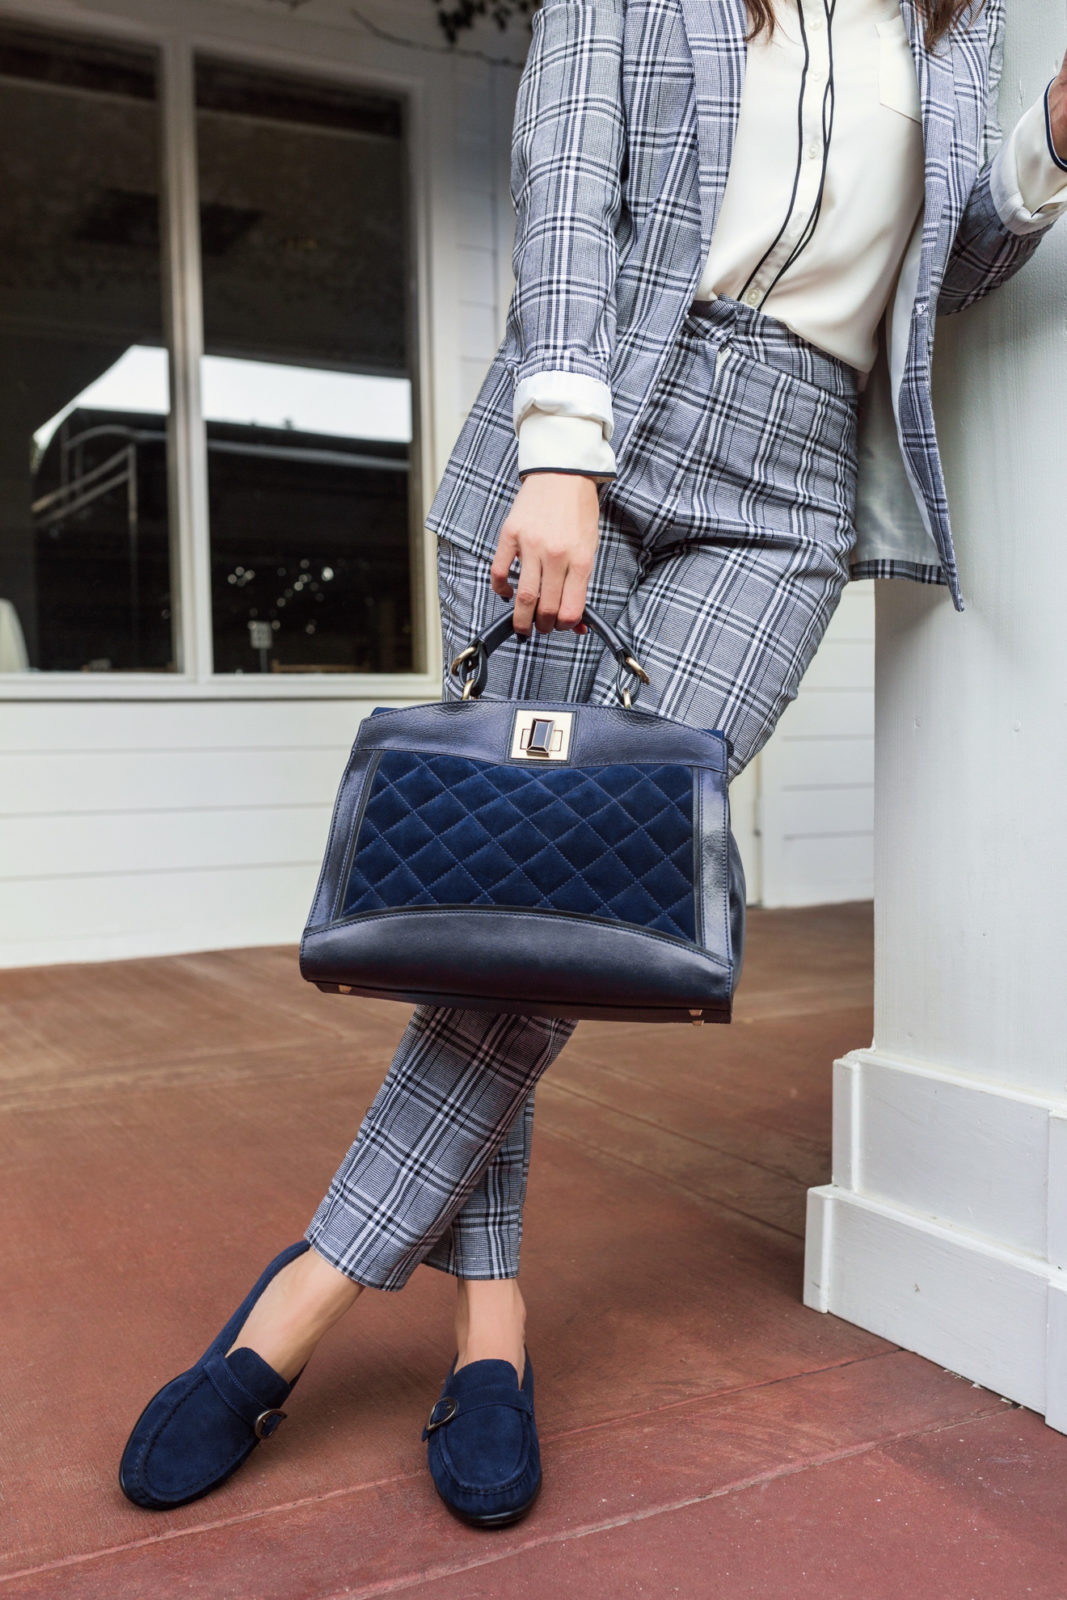 Borrowed from the Boys: Menswear Outfit Ideas for Ladies by Fashion Blogger Laura Lily | Borrowed from the Boys: Menswear for Women by popular California blogger, Laura Lily: image of woman standing outside and wearing a blue plaid suite, blue fedora hat, and Sas blue suede loafers. 